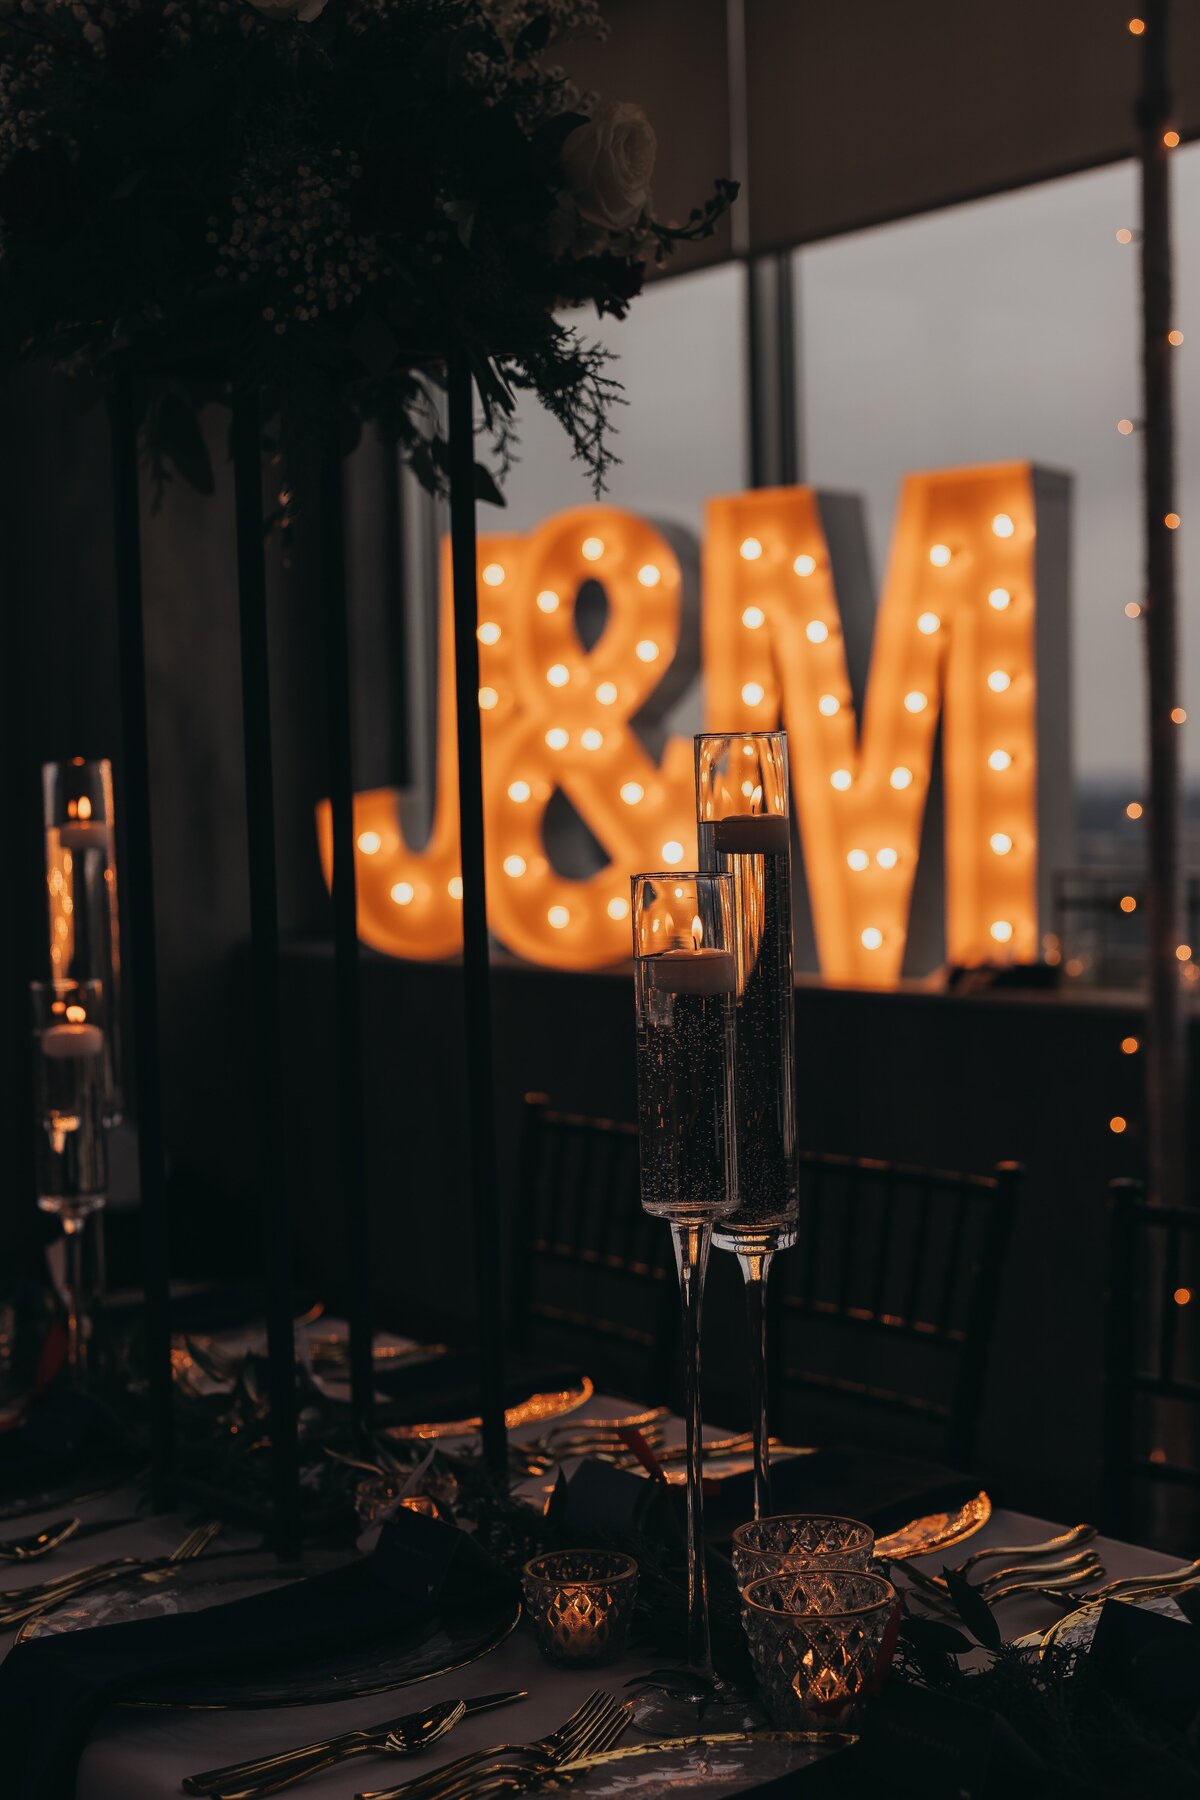 Elegant dinner table setting with champagne flutes, lit candles, and large illuminated letters "J&amp;M" in the background at dusk, expertly organized by a top wedding coordinator from Des Moines.